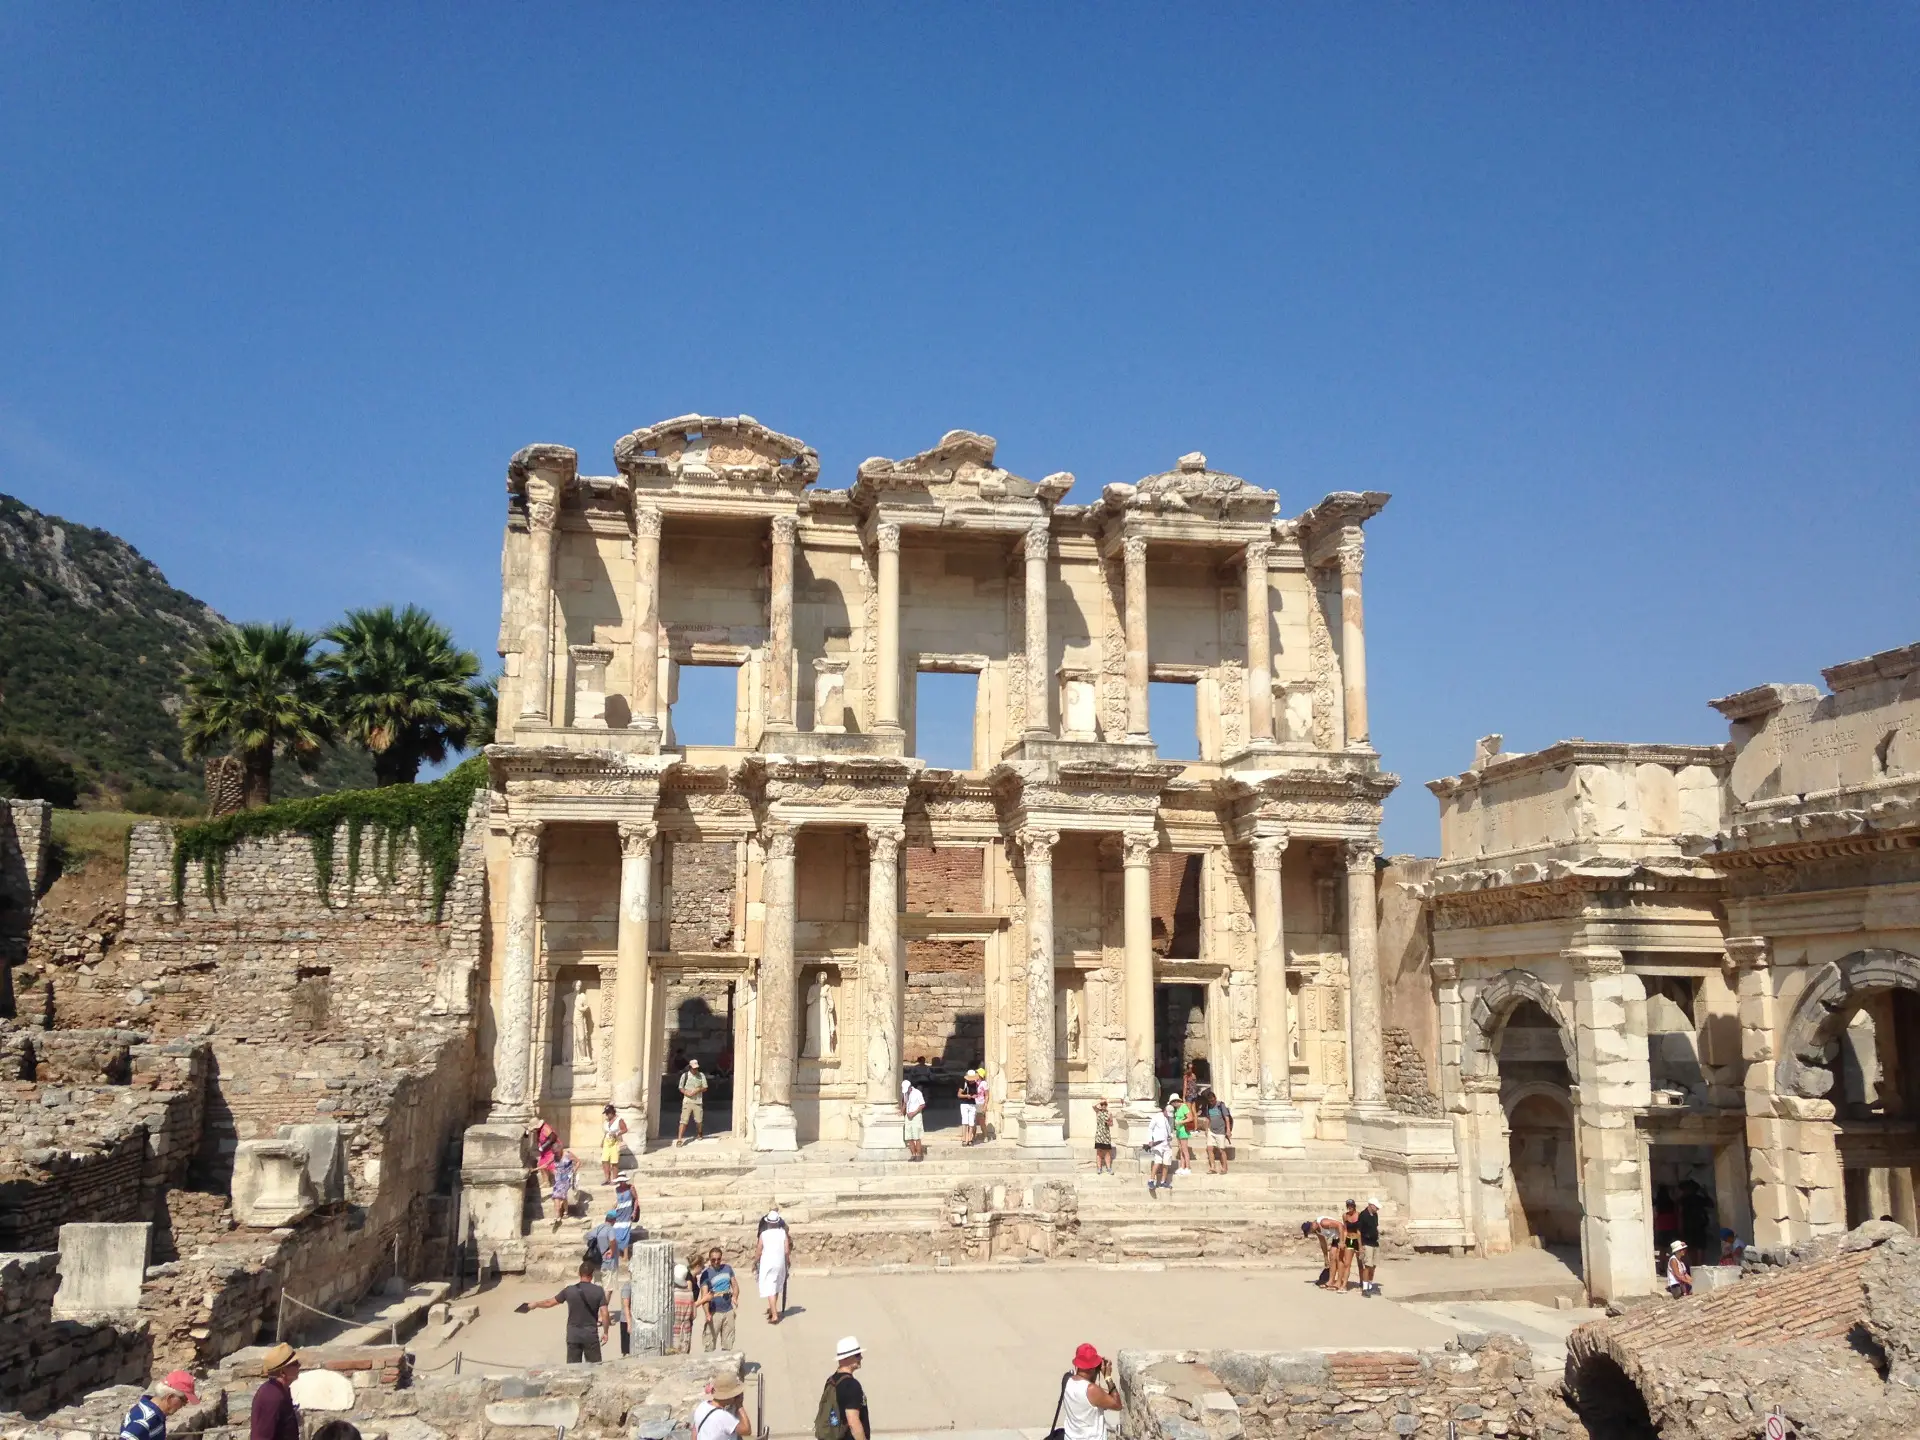 Ephesus, one of the largest open-air museums in the world